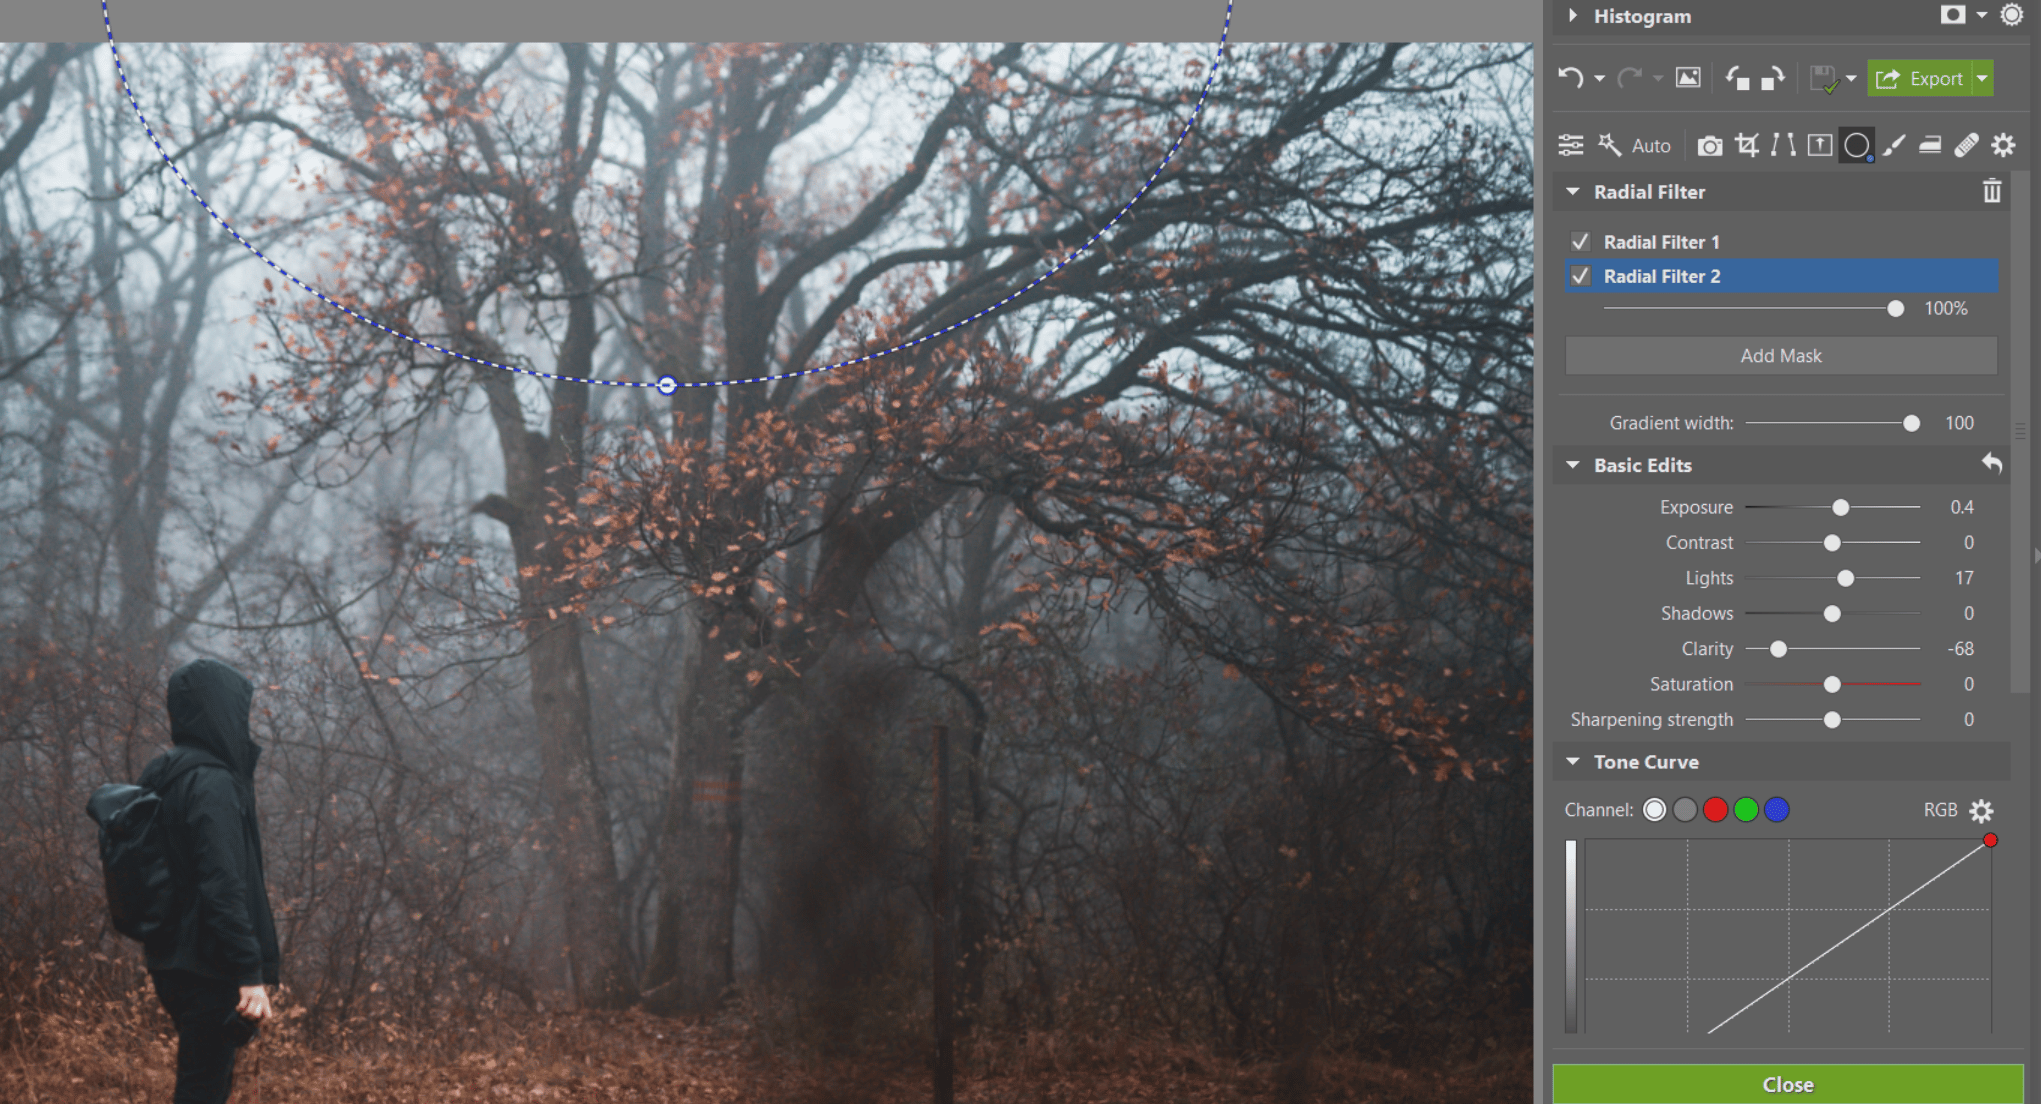 Photographing fog - Get a mysterious atmosphere in your photos. We’ll tell you how to get the right shots and edits 